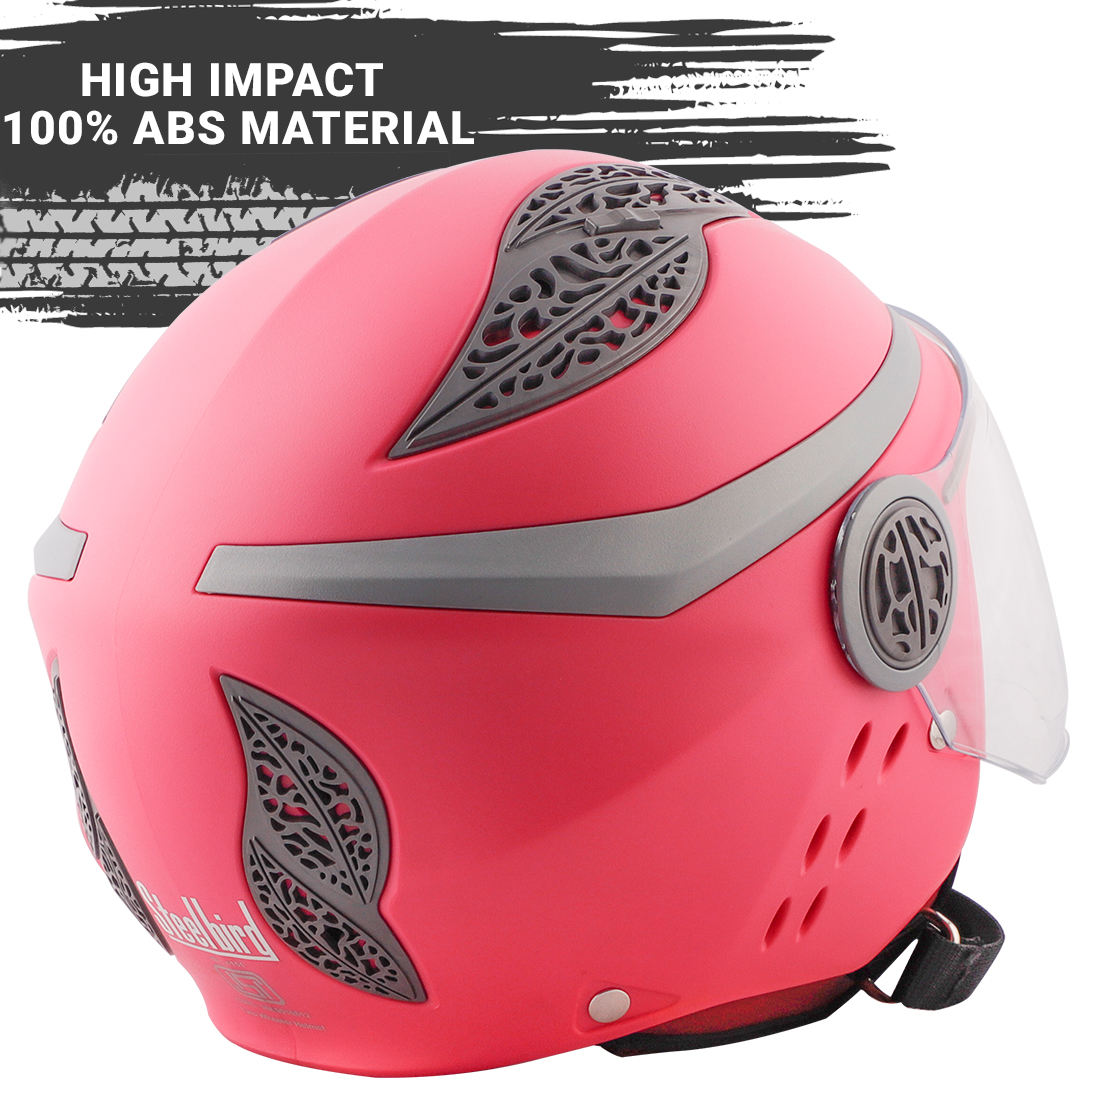 Steelbird Fairy Dashing Specially Designed ISI Certified Helmet For Girls || Womens  (Pink With Clear Visor)